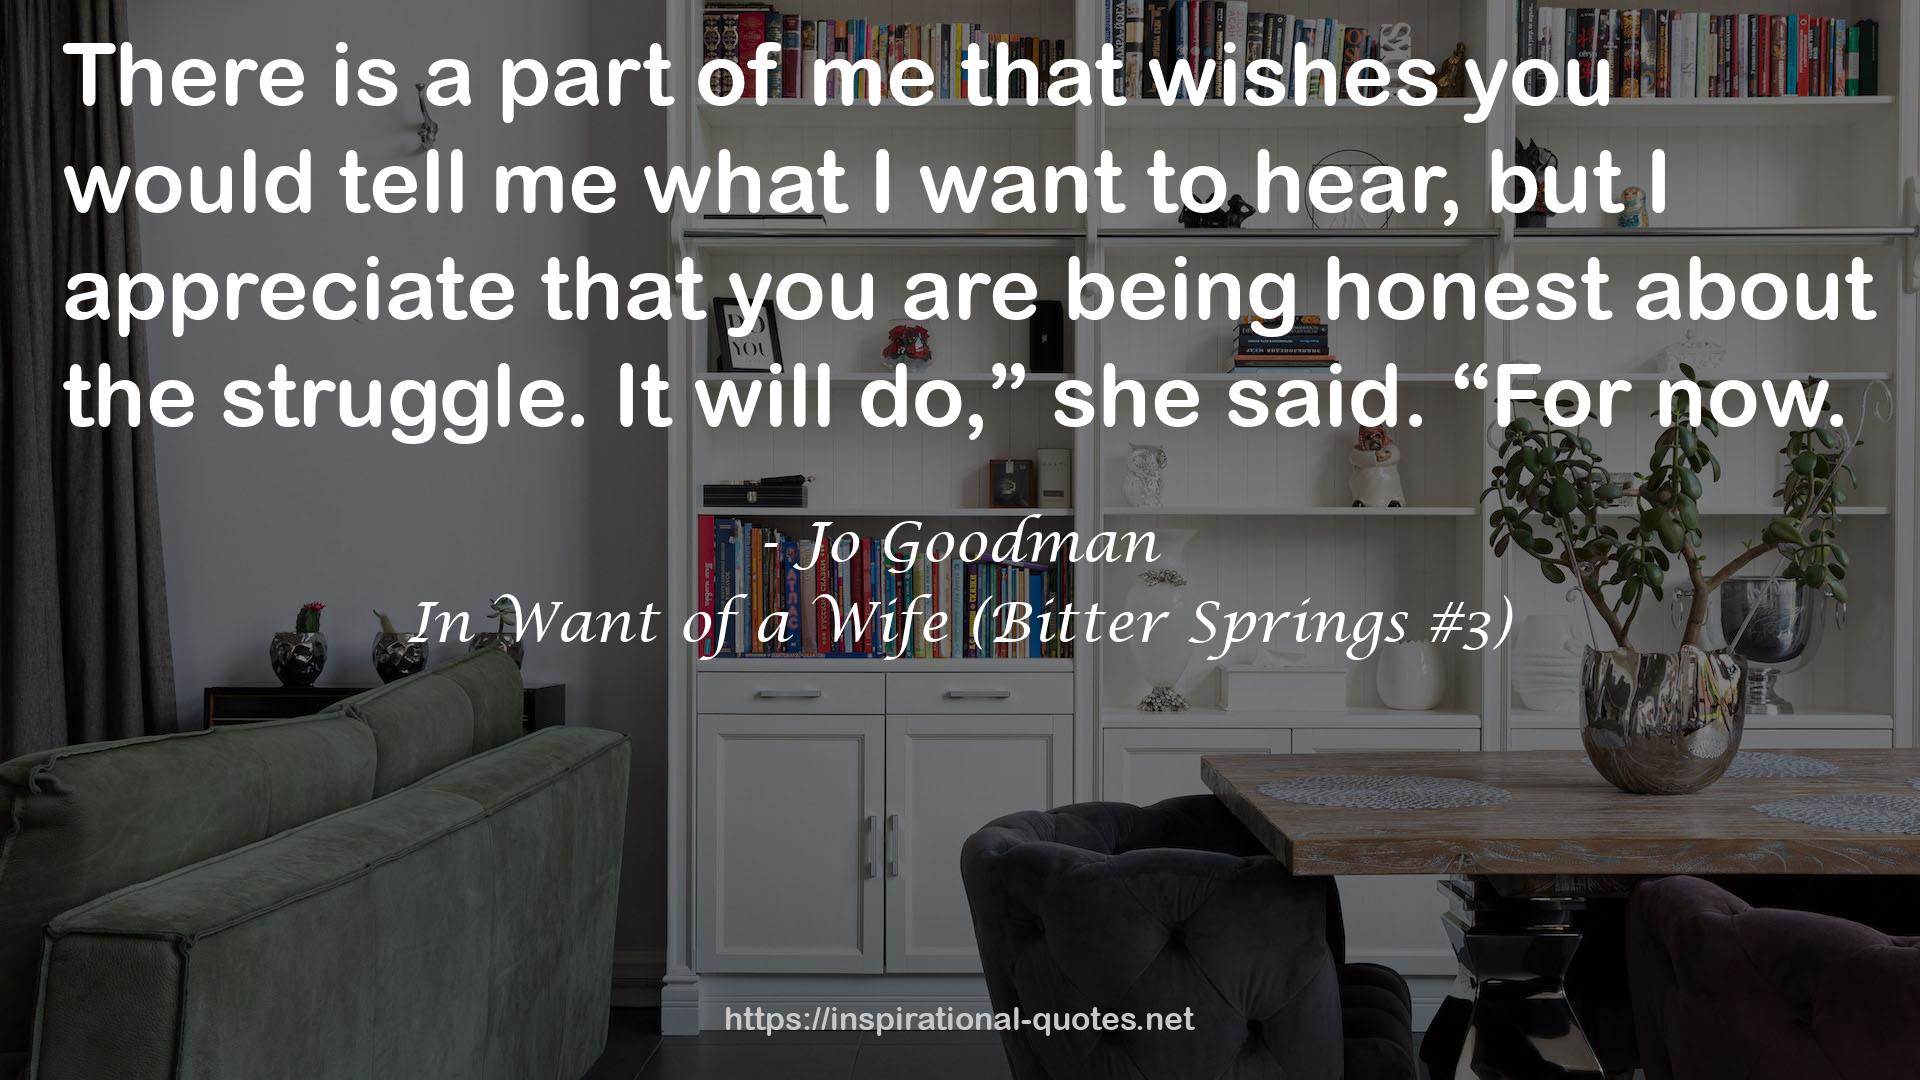 In Want of a Wife (Bitter Springs #3) QUOTES